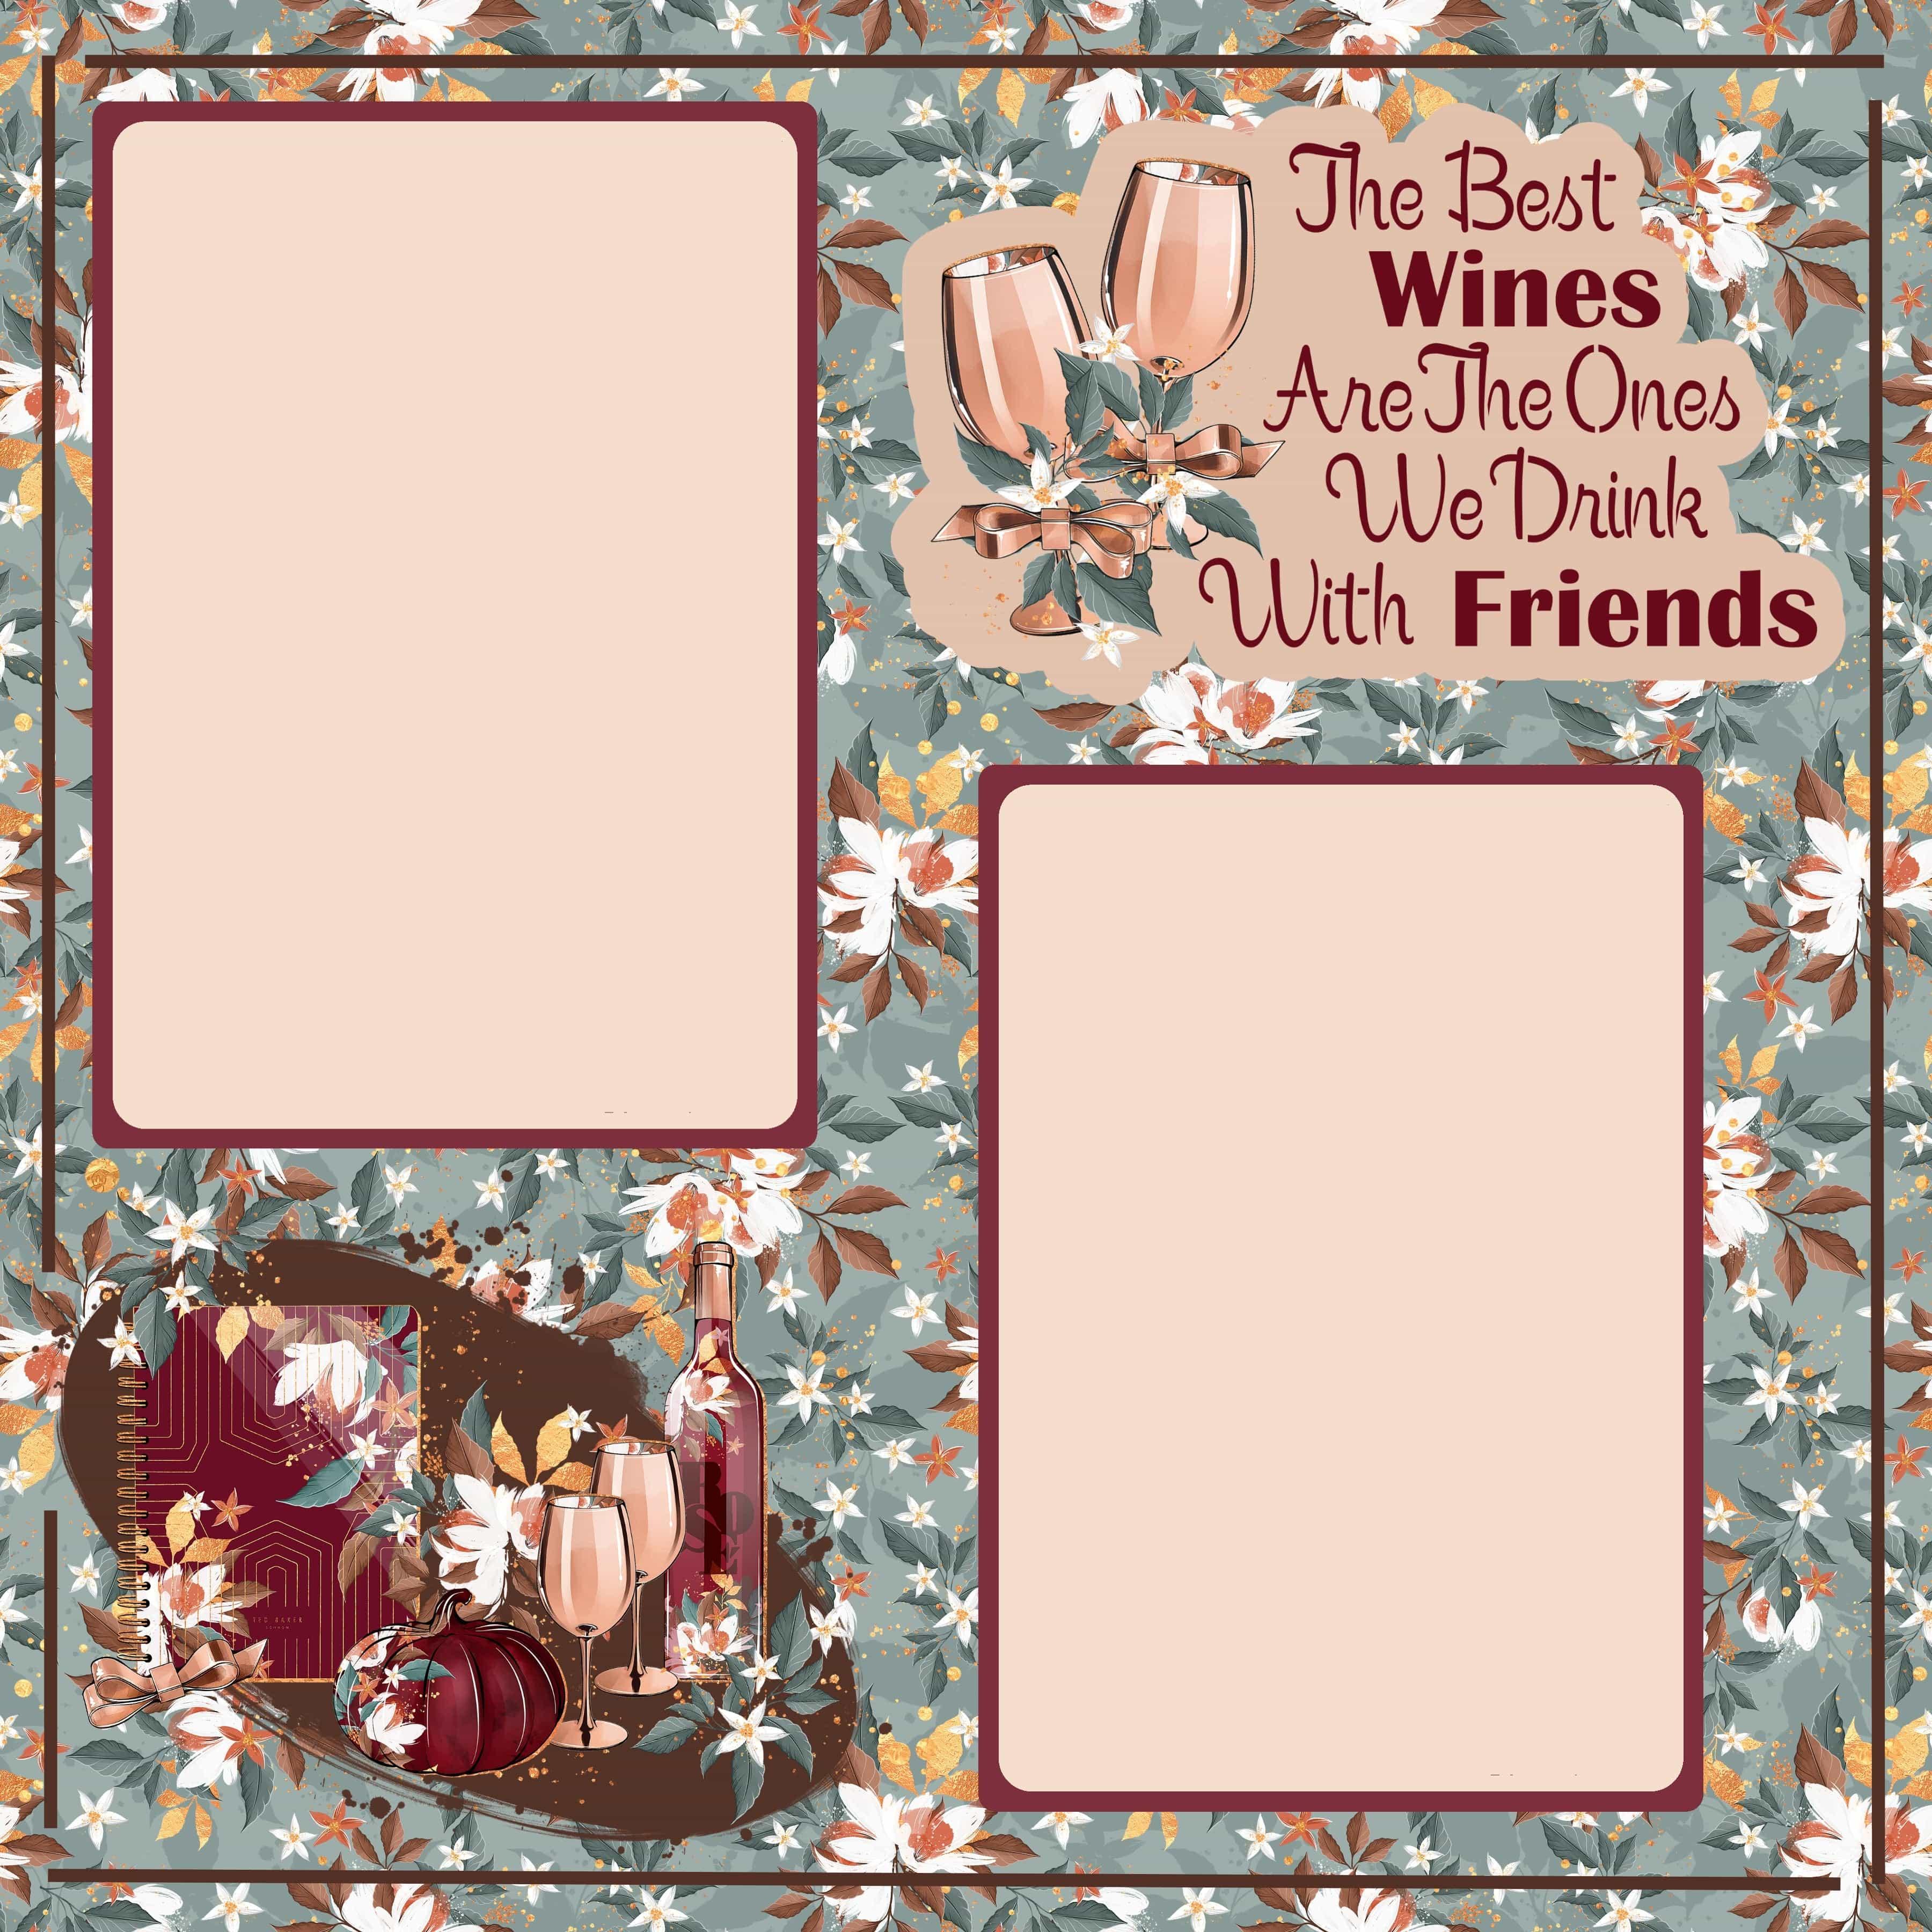 Partners In Wine (2) - 12 x 12 Premade, Printed Scrapbook Pages by SSC Designs - Scrapbook Supply Companies